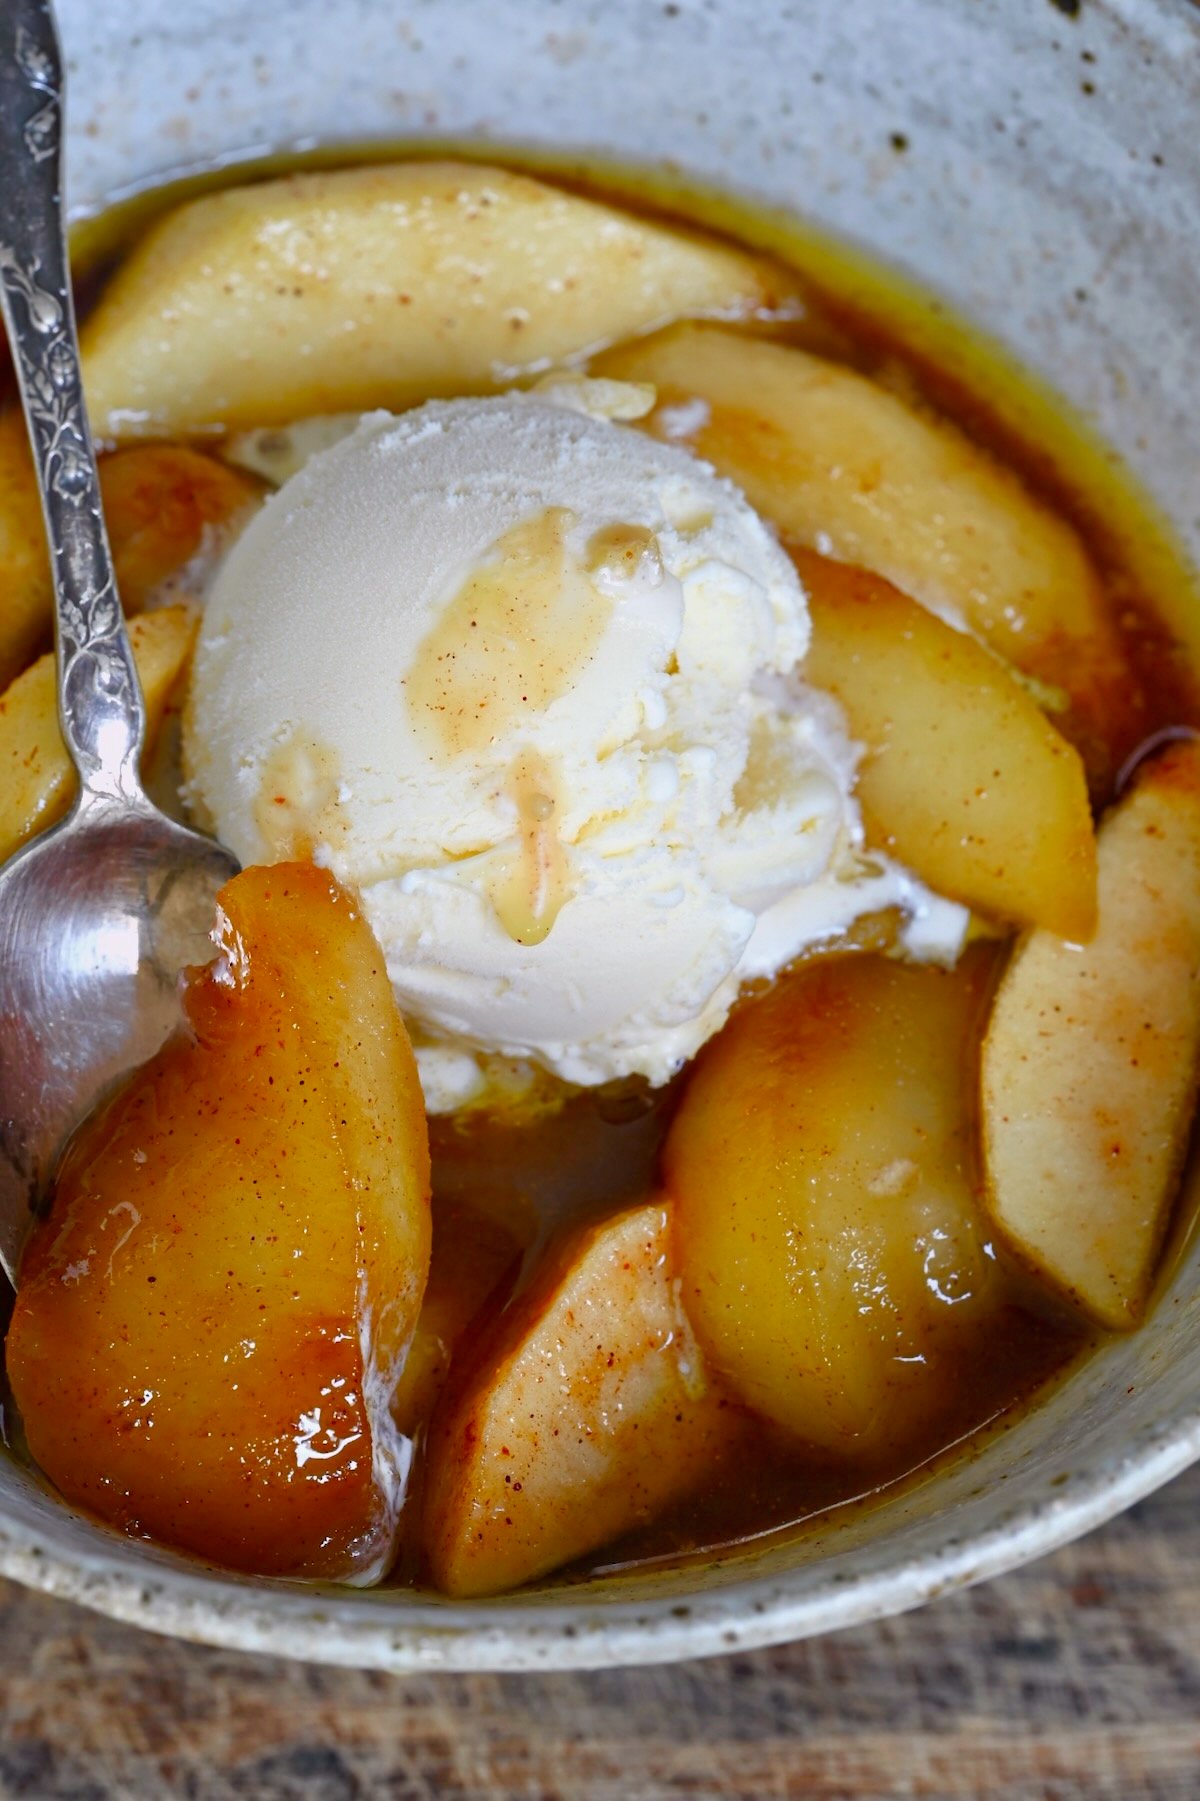 Fried apples topped with ice cream